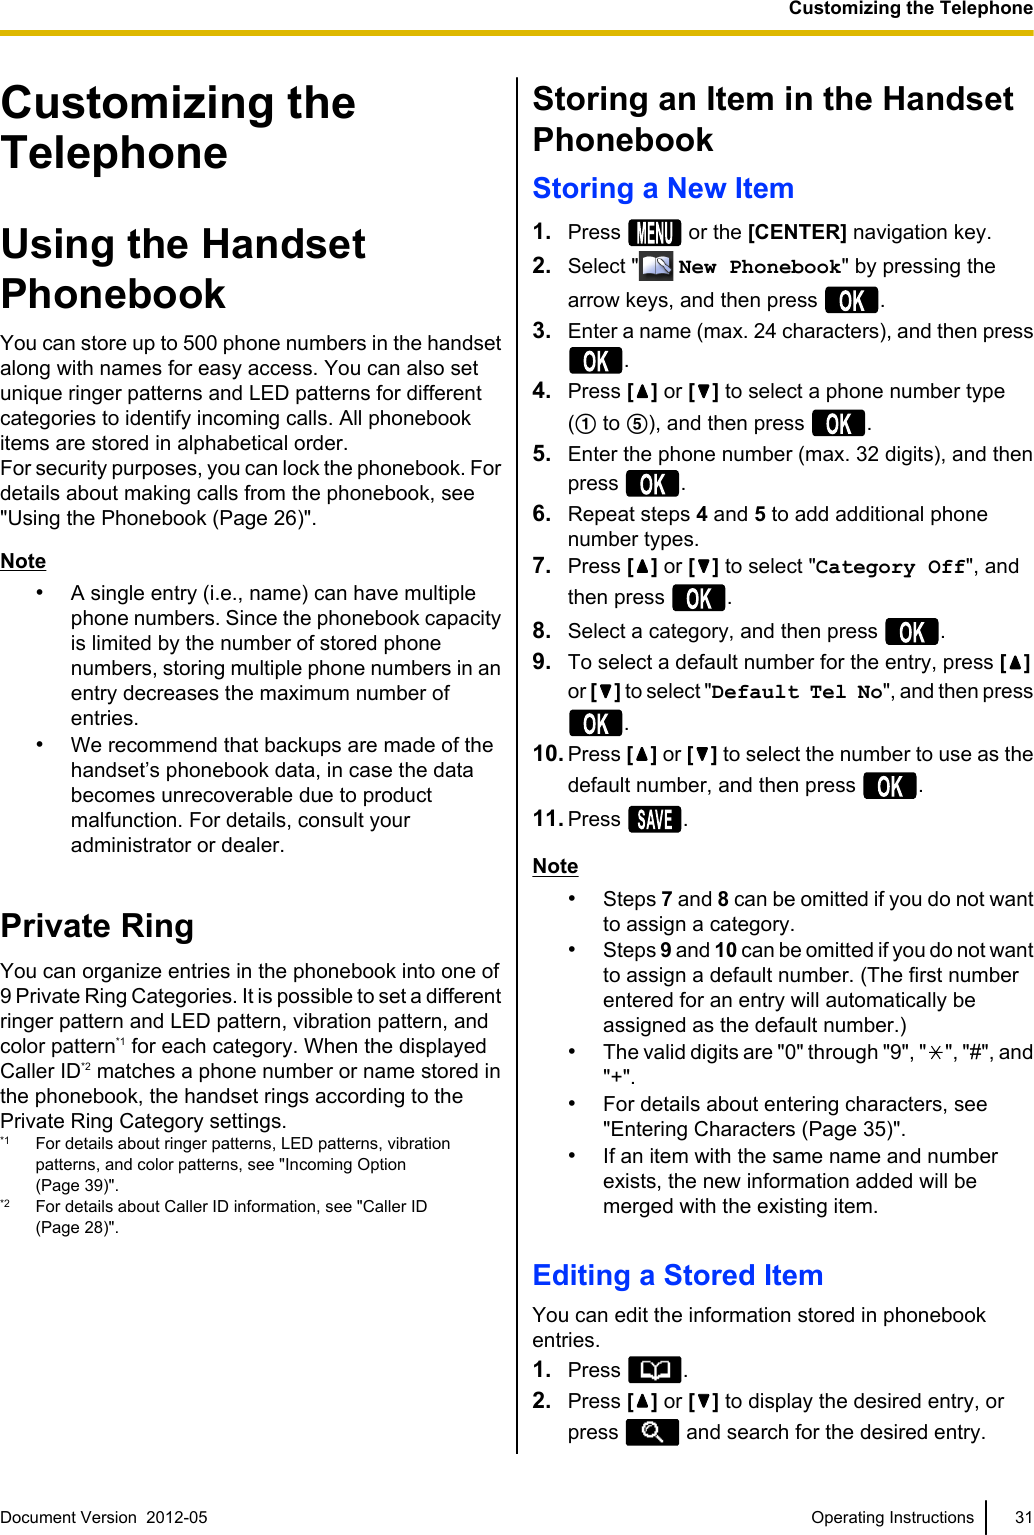 Customizing theTelephoneUsing the HandsetPhonebookYou can store up to 500 phone numbers in the handsetalong with names for easy access. You can also setunique ringer patterns and LED patterns for differentcategories to identify incoming calls. All phonebookitems are stored in alphabetical order.For security purposes, you can lock the phonebook. Fordetails about making calls from the phonebook, see&quot;Using the Phonebook (Page 26)&quot;.Note•A single entry (i.e., name) can have multiplephone numbers. Since the phonebook capacityis limited by the number of stored phonenumbers, storing multiple phone numbers in anentry decreases the maximum number ofentries.•We recommend that backups are made of thehandset’s phonebook data, in case the databecomes unrecoverable due to productmalfunction. For details, consult youradministrator or dealer.Private RingYou can organize entries in the phonebook into one of9 Private Ring Categories. It is possible to set a differentringer pattern and LED pattern, vibration pattern, andcolor pattern*1 for each category. When the displayedCaller ID*2 matches a phone number or name stored inthe phonebook, the handset rings according to thePrivate Ring Category settings.*1 For details about ringer patterns, LED patterns, vibrationpatterns, and color patterns, see &quot;Incoming Option(Page 39)&quot;.*2 For details about Caller ID information, see &quot;Caller ID(Page 28)&quot;.Storing an Item in the HandsetPhonebookStoring a New Item1. Press   or the [CENTER] navigation key.2. Select &quot;  New Phonebook&quot; by pressing thearrow keys, and then press  .3. Enter a name (max. 24 characters), and then press.4. Press [ ] or [ ] to select a phone number type(A to E), and then press  .5. Enter the phone number (max. 32 digits), and thenpress  .6. Repeat steps 4 and 5 to add additional phonenumber types.7. Press [ ] or [ ] to select &quot;Category Off&quot;, andthen press  .8. Select a category, and then press  .9. To select a default number for the entry, press [ ]or [ ] to select &quot;Default Tel No&quot;, and then press.10. Press [] or [ ] to select the number to use as thedefault number, and then press  .11. Press  .Note•Steps 7 and 8 can be omitted if you do not wantto assign a category.•Steps 9 and 10 can be omitted if you do not wantto assign a default number. (The first numberentered for an entry will automatically beassigned as the default number.)•The valid digits are &quot;0&quot; through &quot;9&quot;, &quot; &quot;, &quot;#&quot;, and&quot;+&quot;.•For details about entering characters, see&quot;Entering Characters (Page 35)&quot;.•If an item with the same name and numberexists, the new information added will bemerged with the existing item.Editing a Stored ItemYou can edit the information stored in phonebookentries.1. Press  .2. Press [ ] or [ ] to display the desired entry, orpress   and search for the desired entry.Document Version  2012-05   Operating Instructions 31Customizing the Telephone